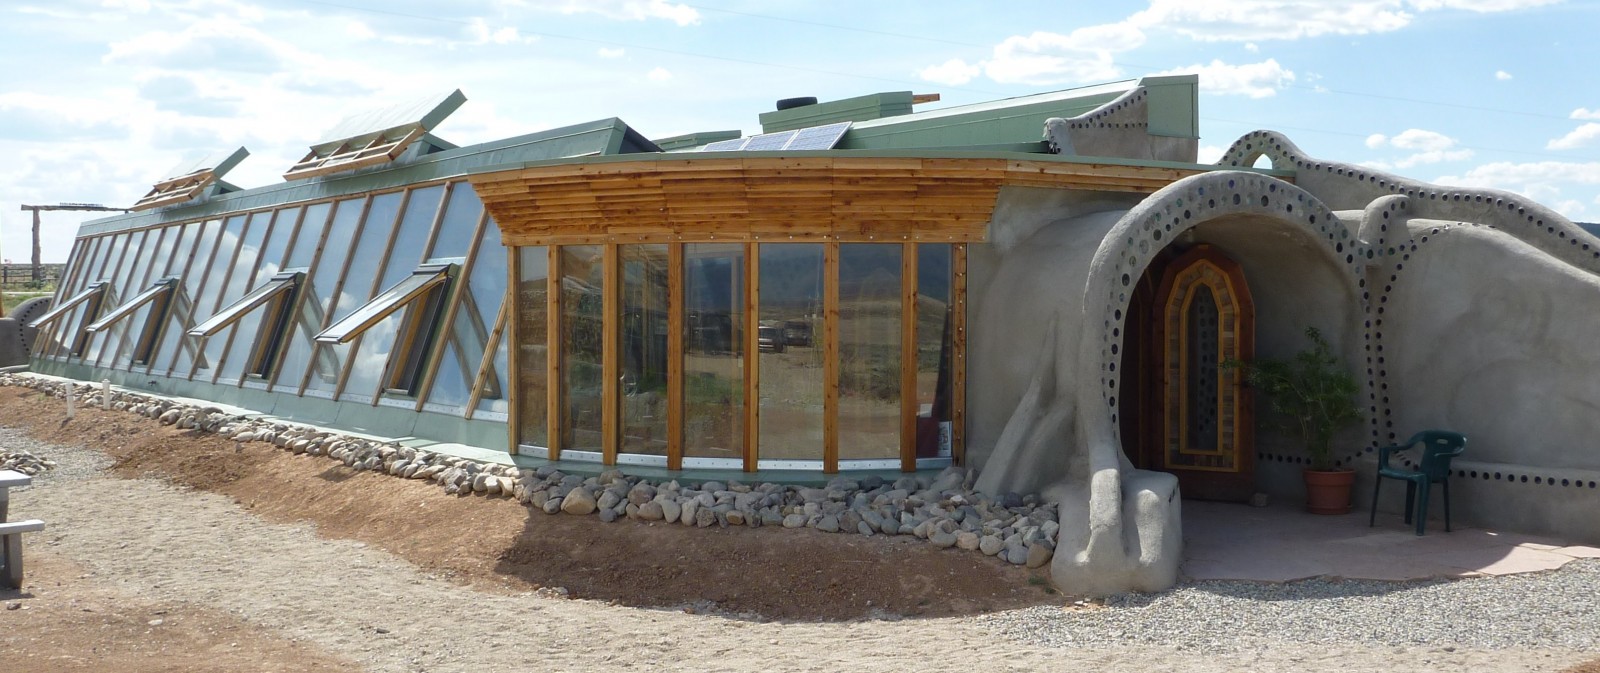 Earthship building in New Mexico